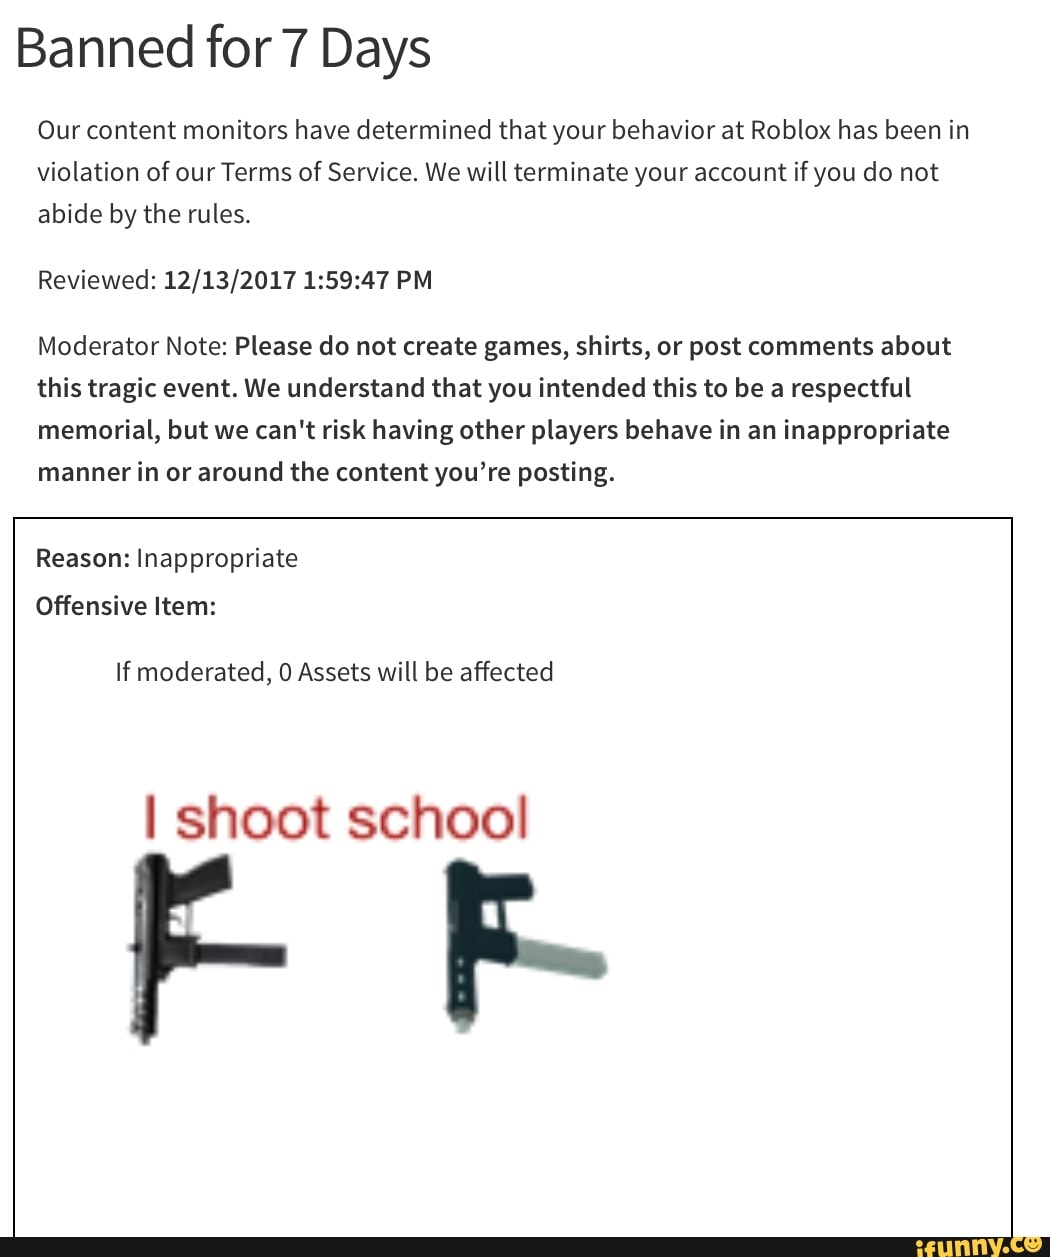 Bannedforydays Our Content Monitors Have Determined That Your Behavior At Roblox Has Been In Violation Of Ourterms Of Service We Will Terminate Your Account If You Do Not Abide By The Rules - report rule violations roblox